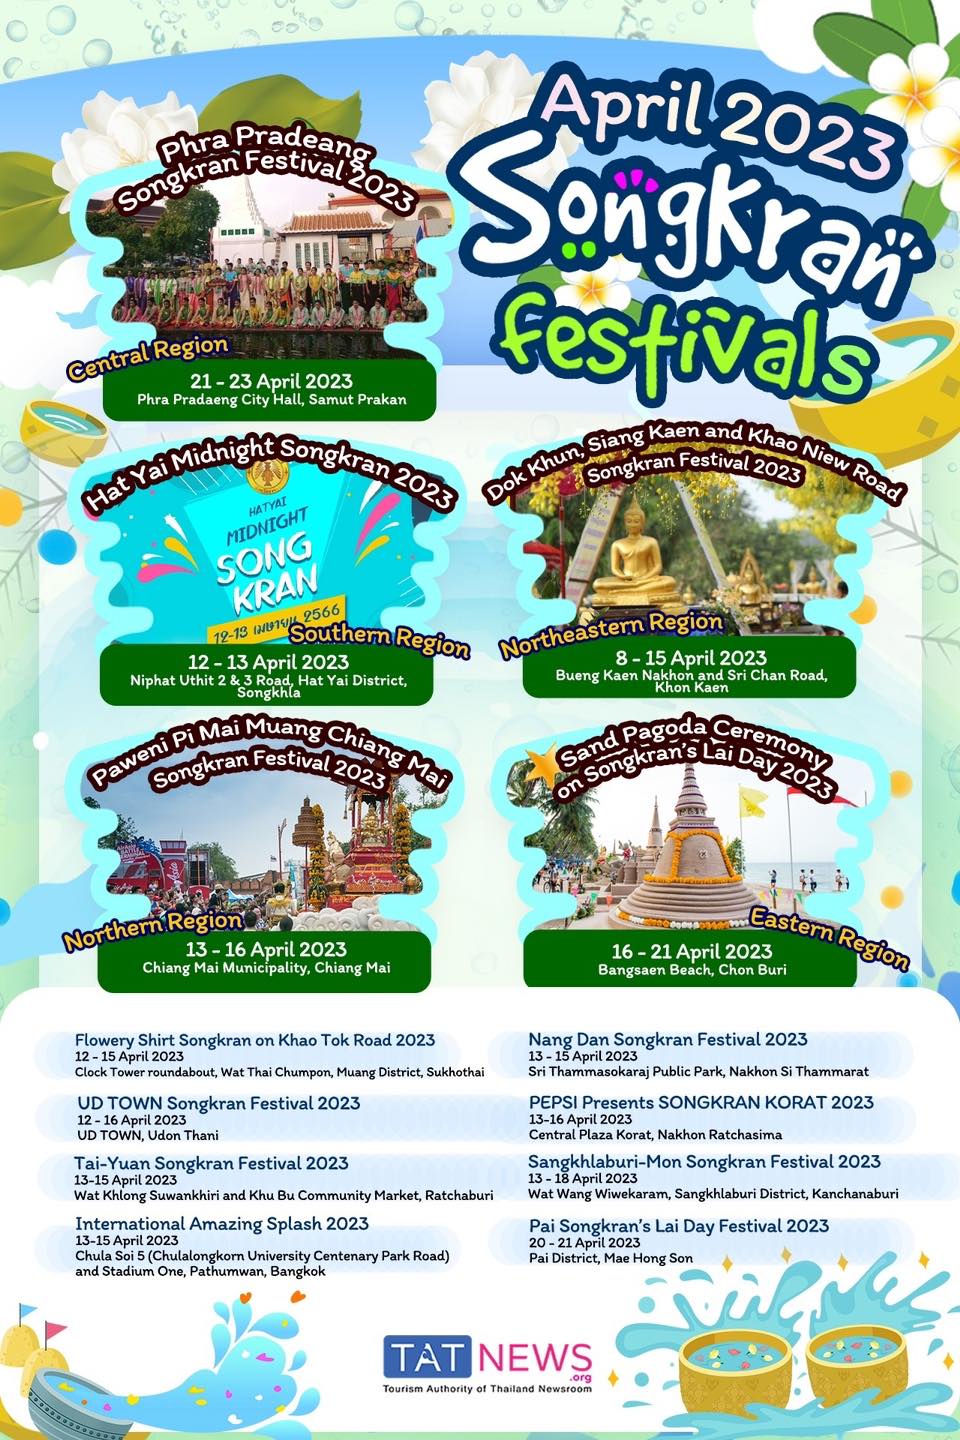 t 11 April 2023s festivals and events in Thailand 2